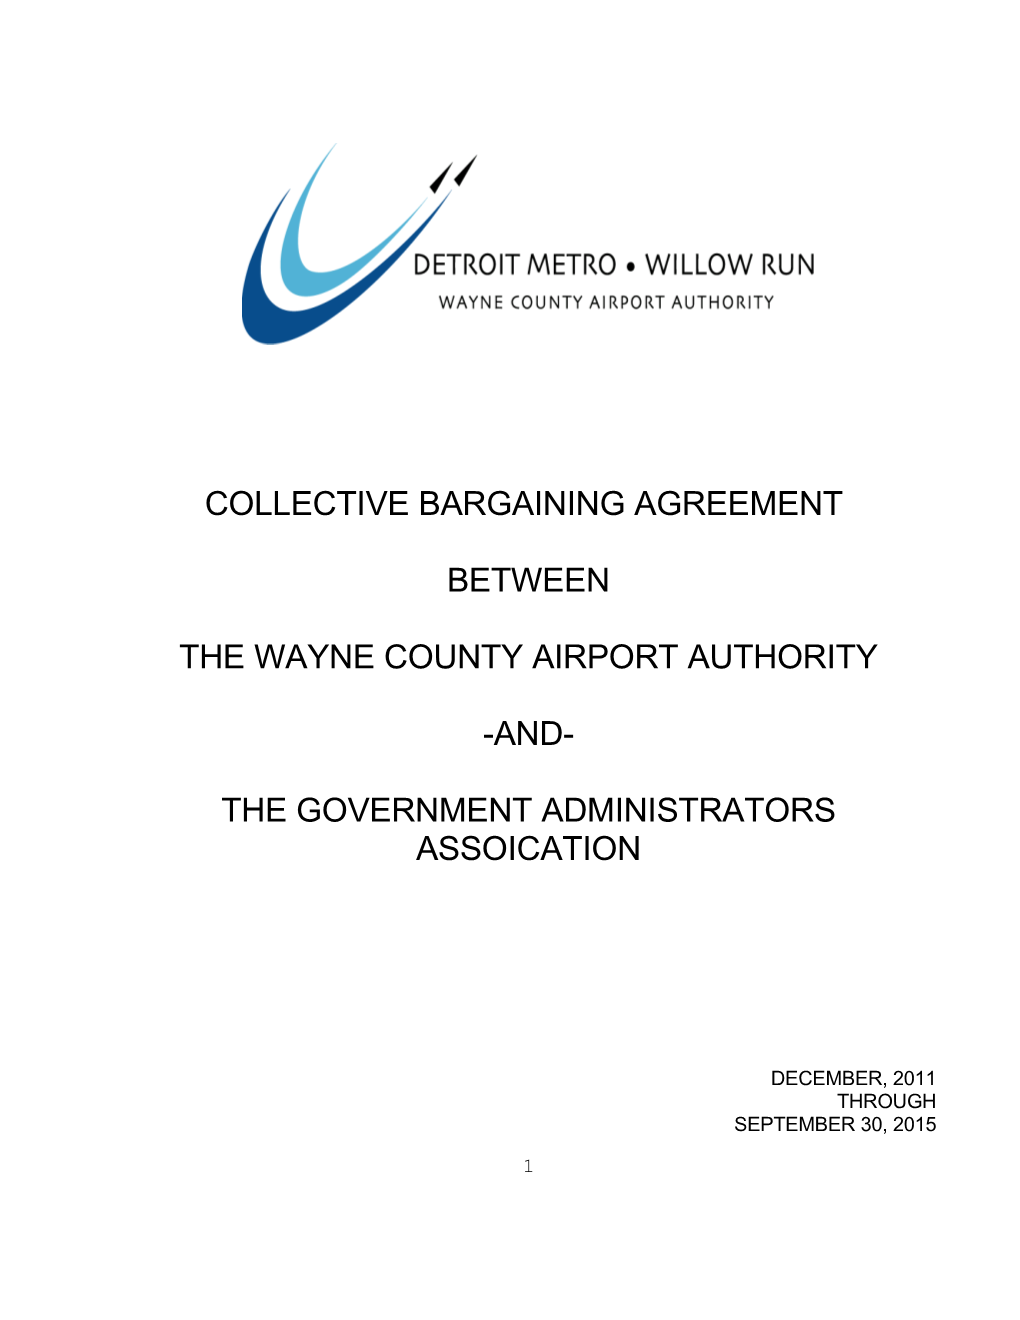 The Wayne County Airport Authority